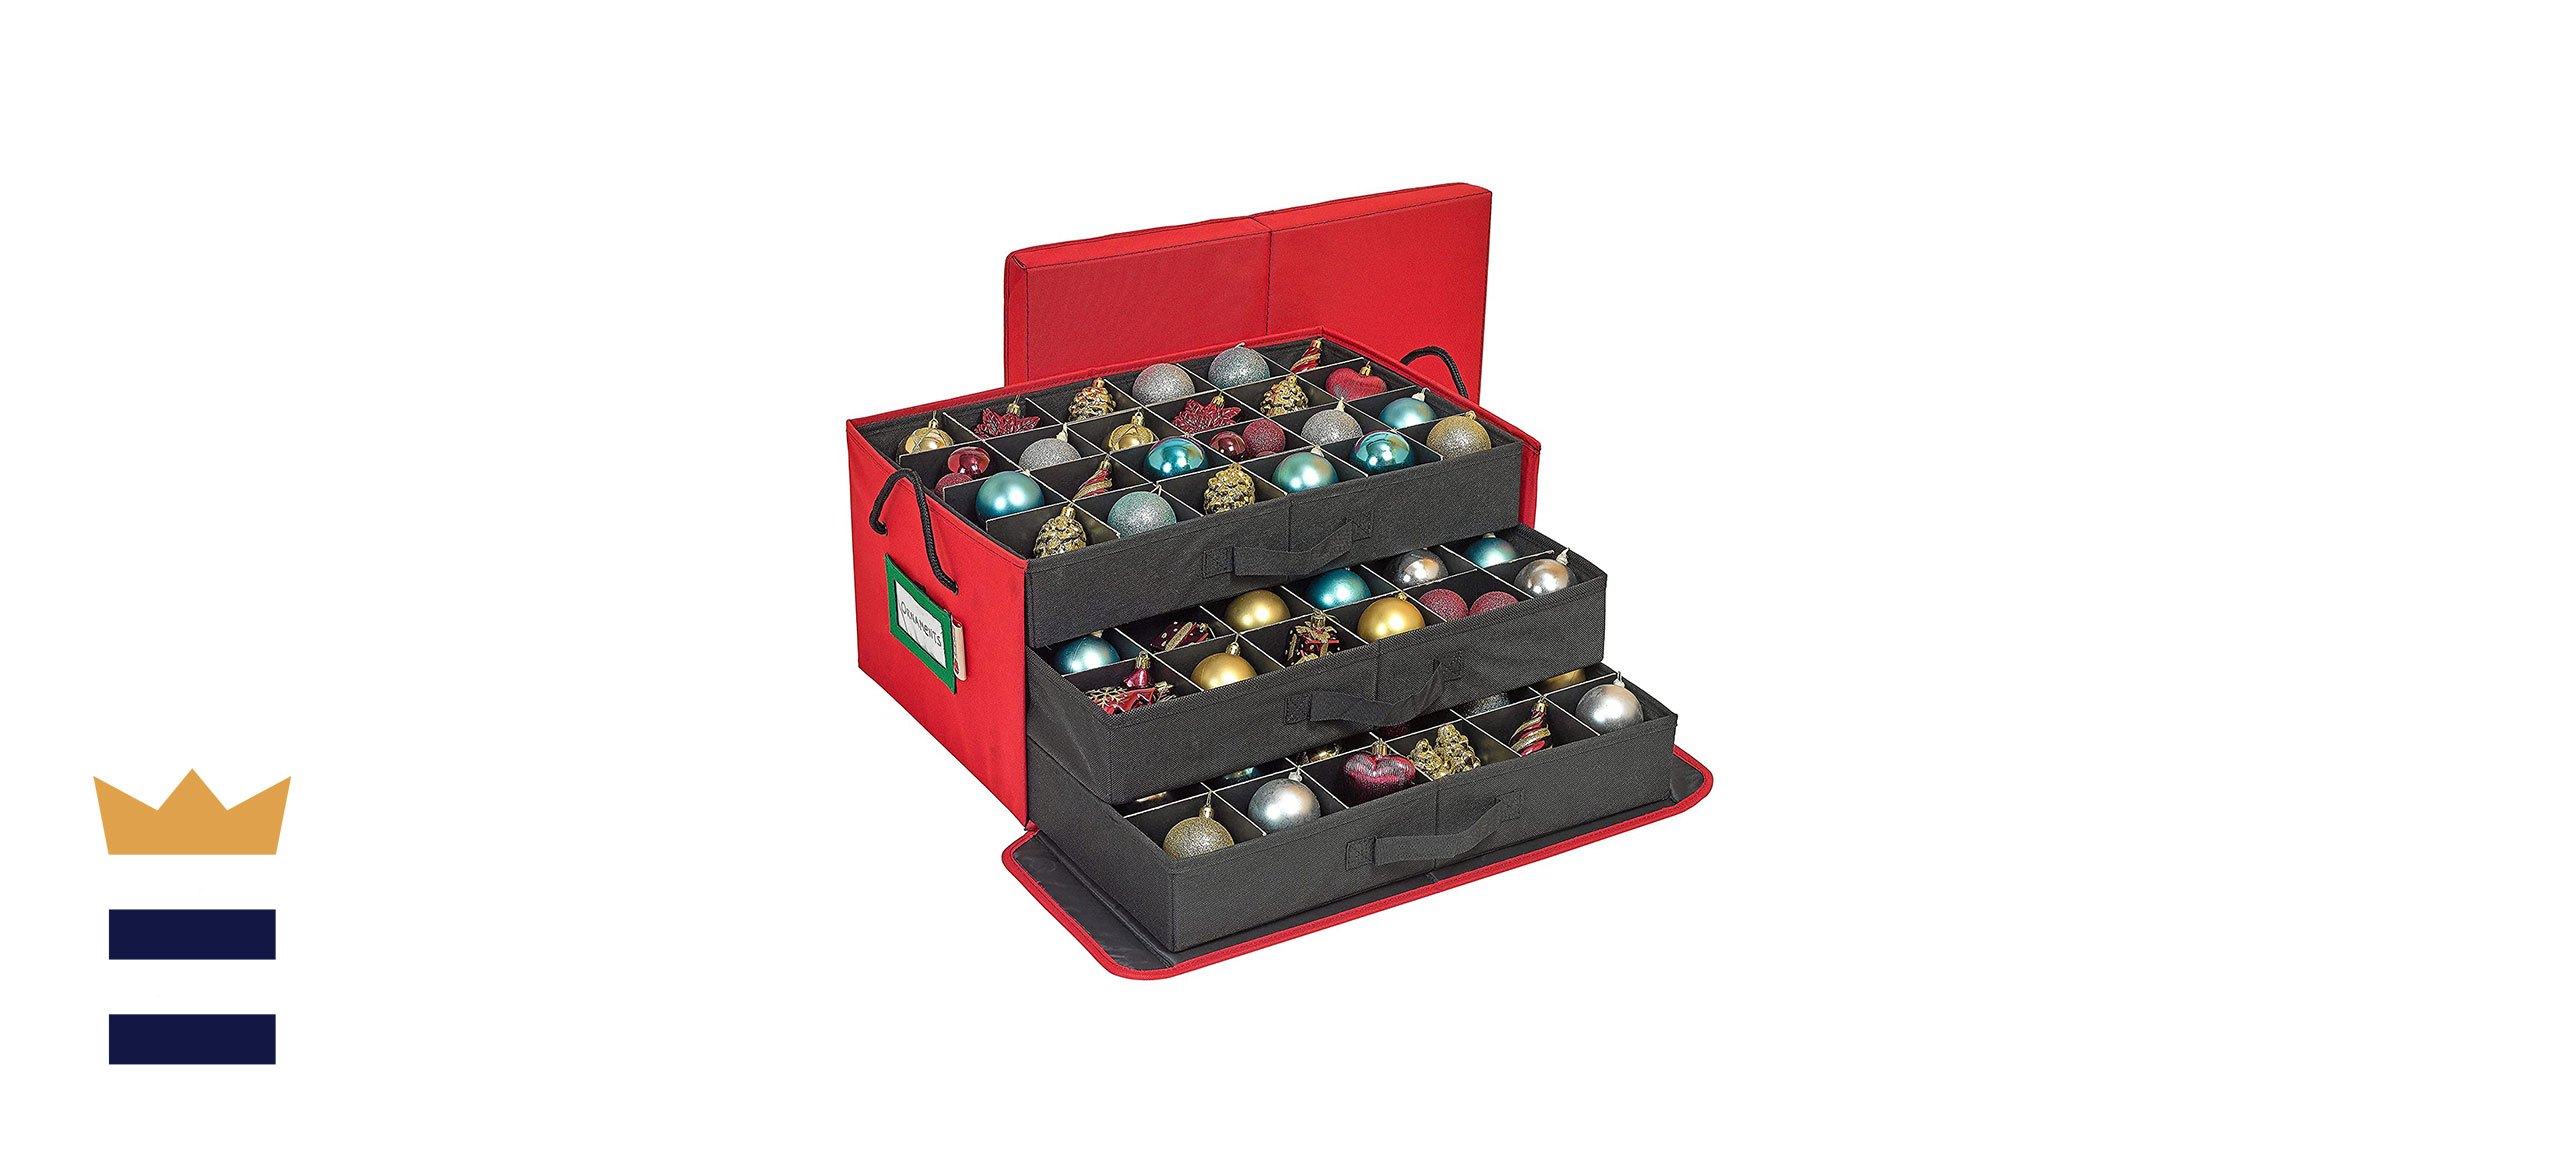 Holdn’ Storage Christmas Ornament Storage Container Box 